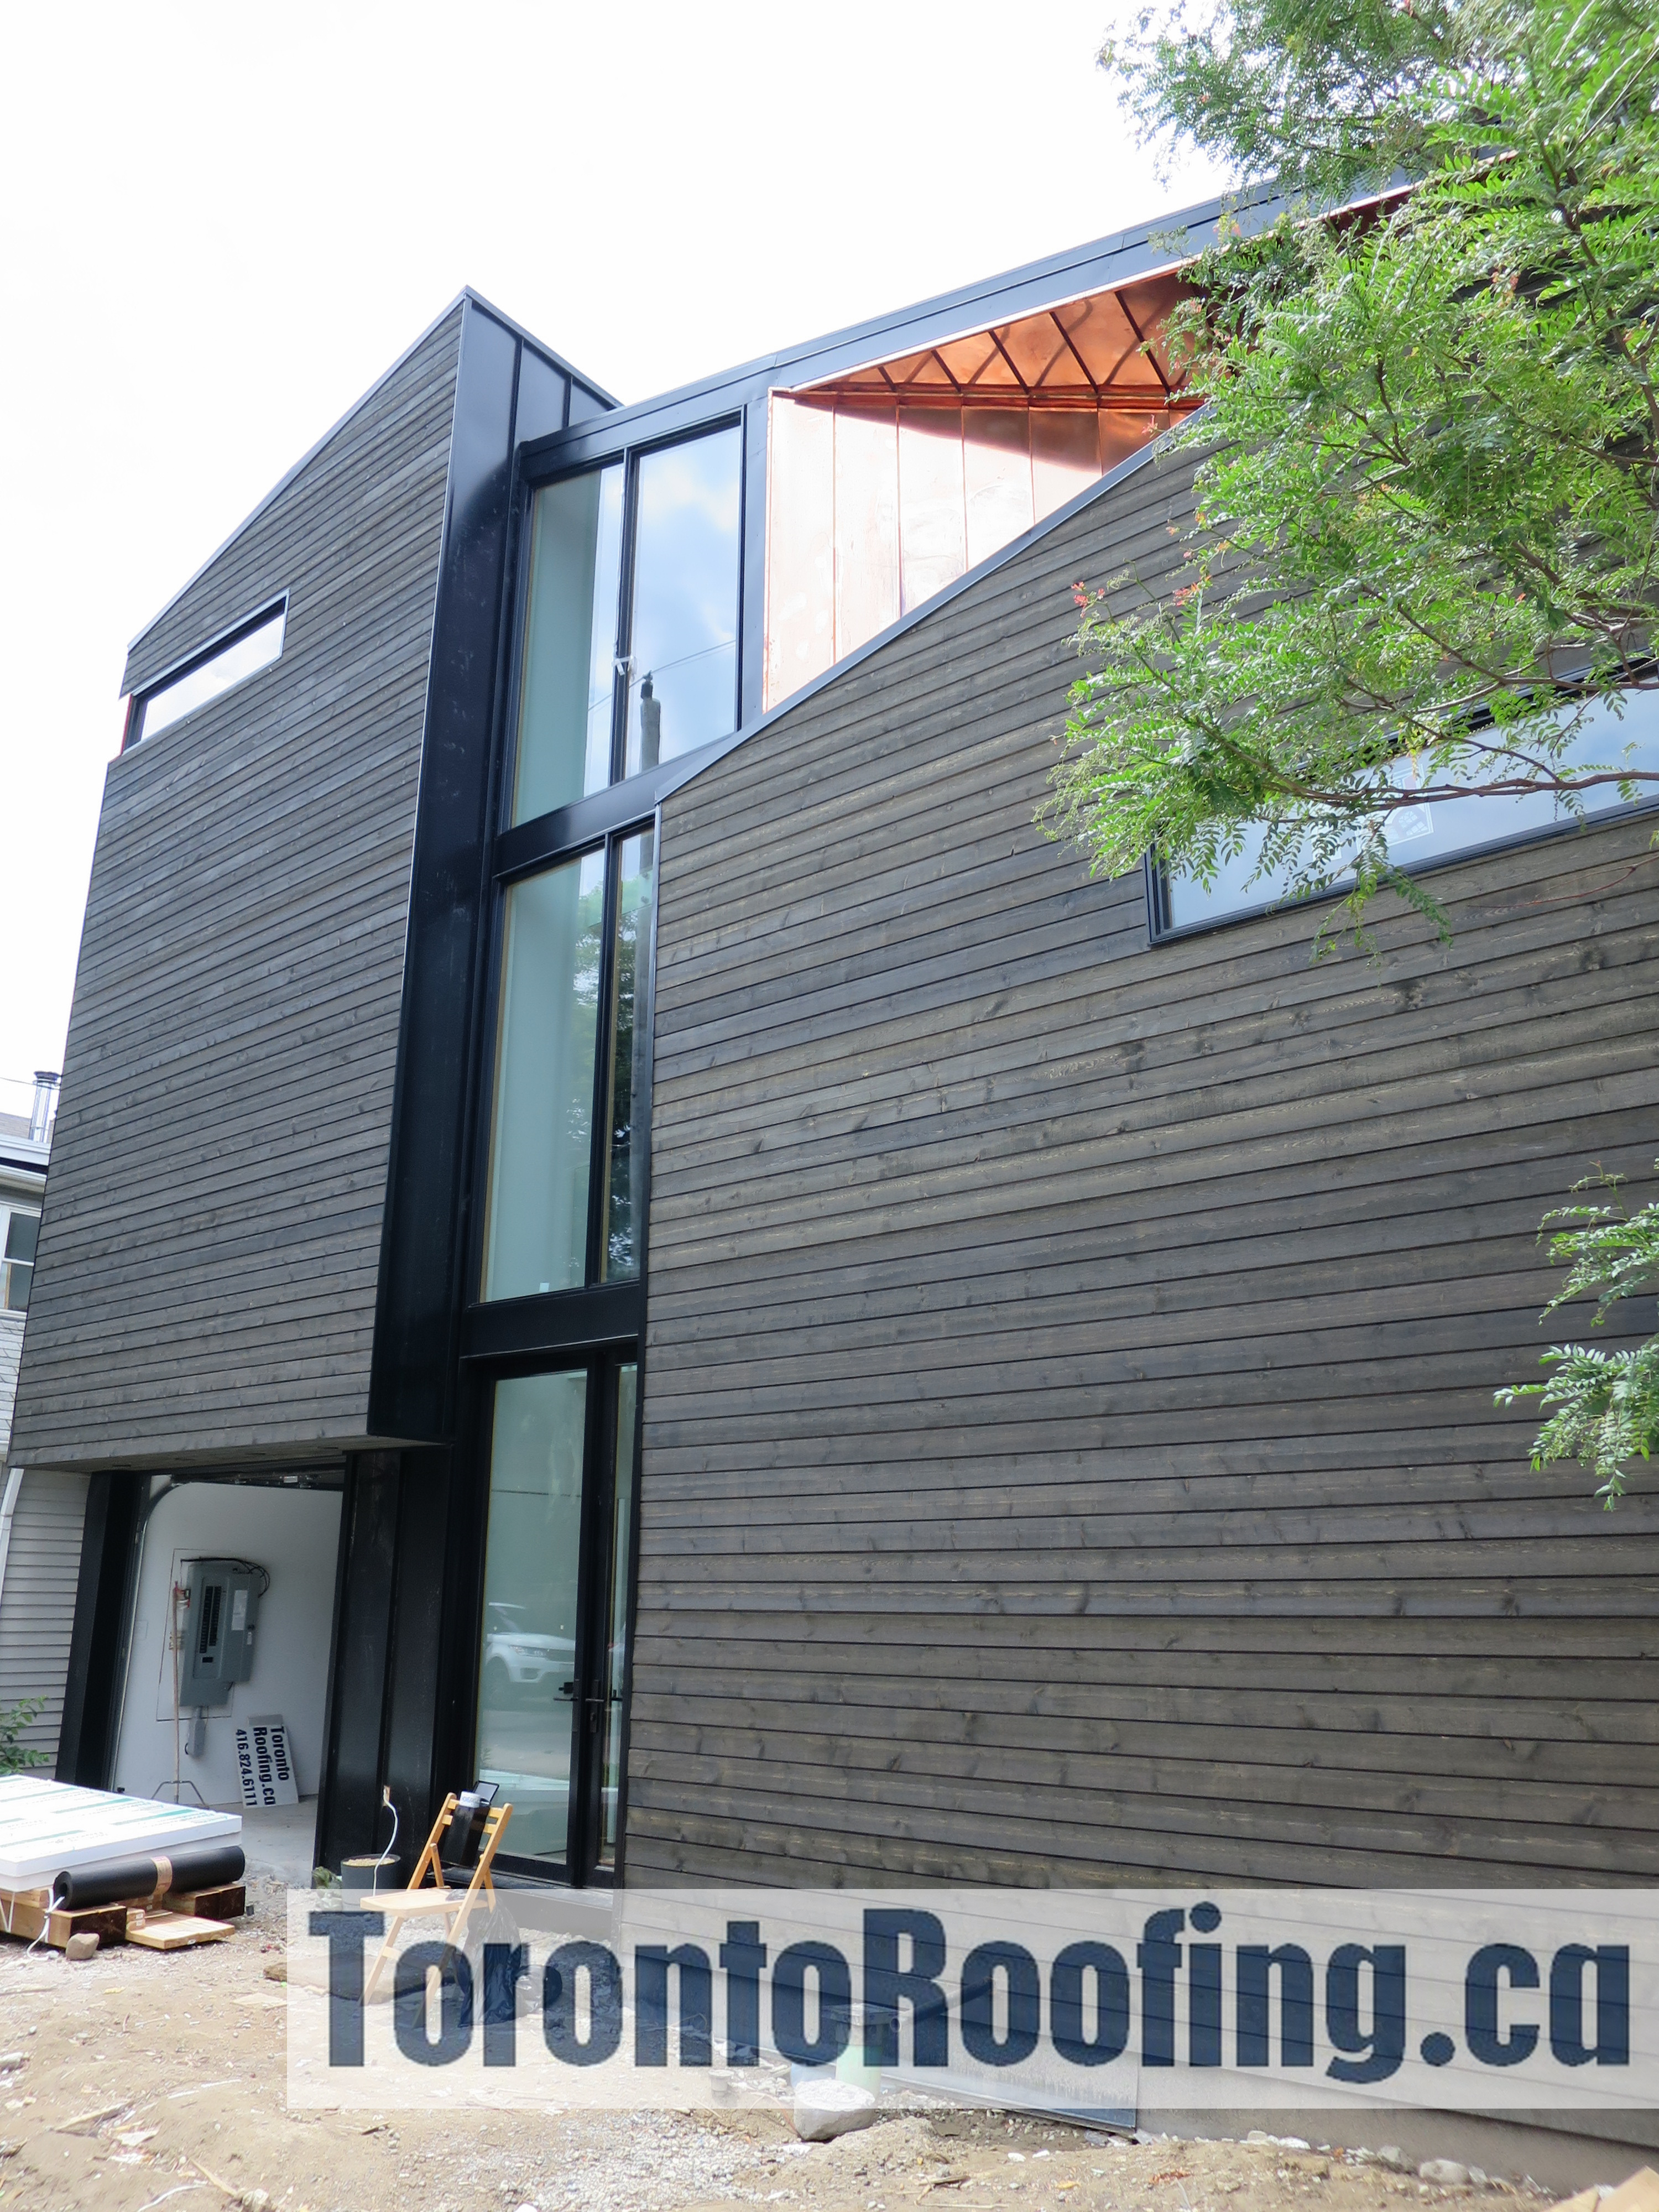 toronto,roofing,roof,siding,metal,copper,wood,modern,homes,aluminum,cladding,architeture,building,contractor,exterior